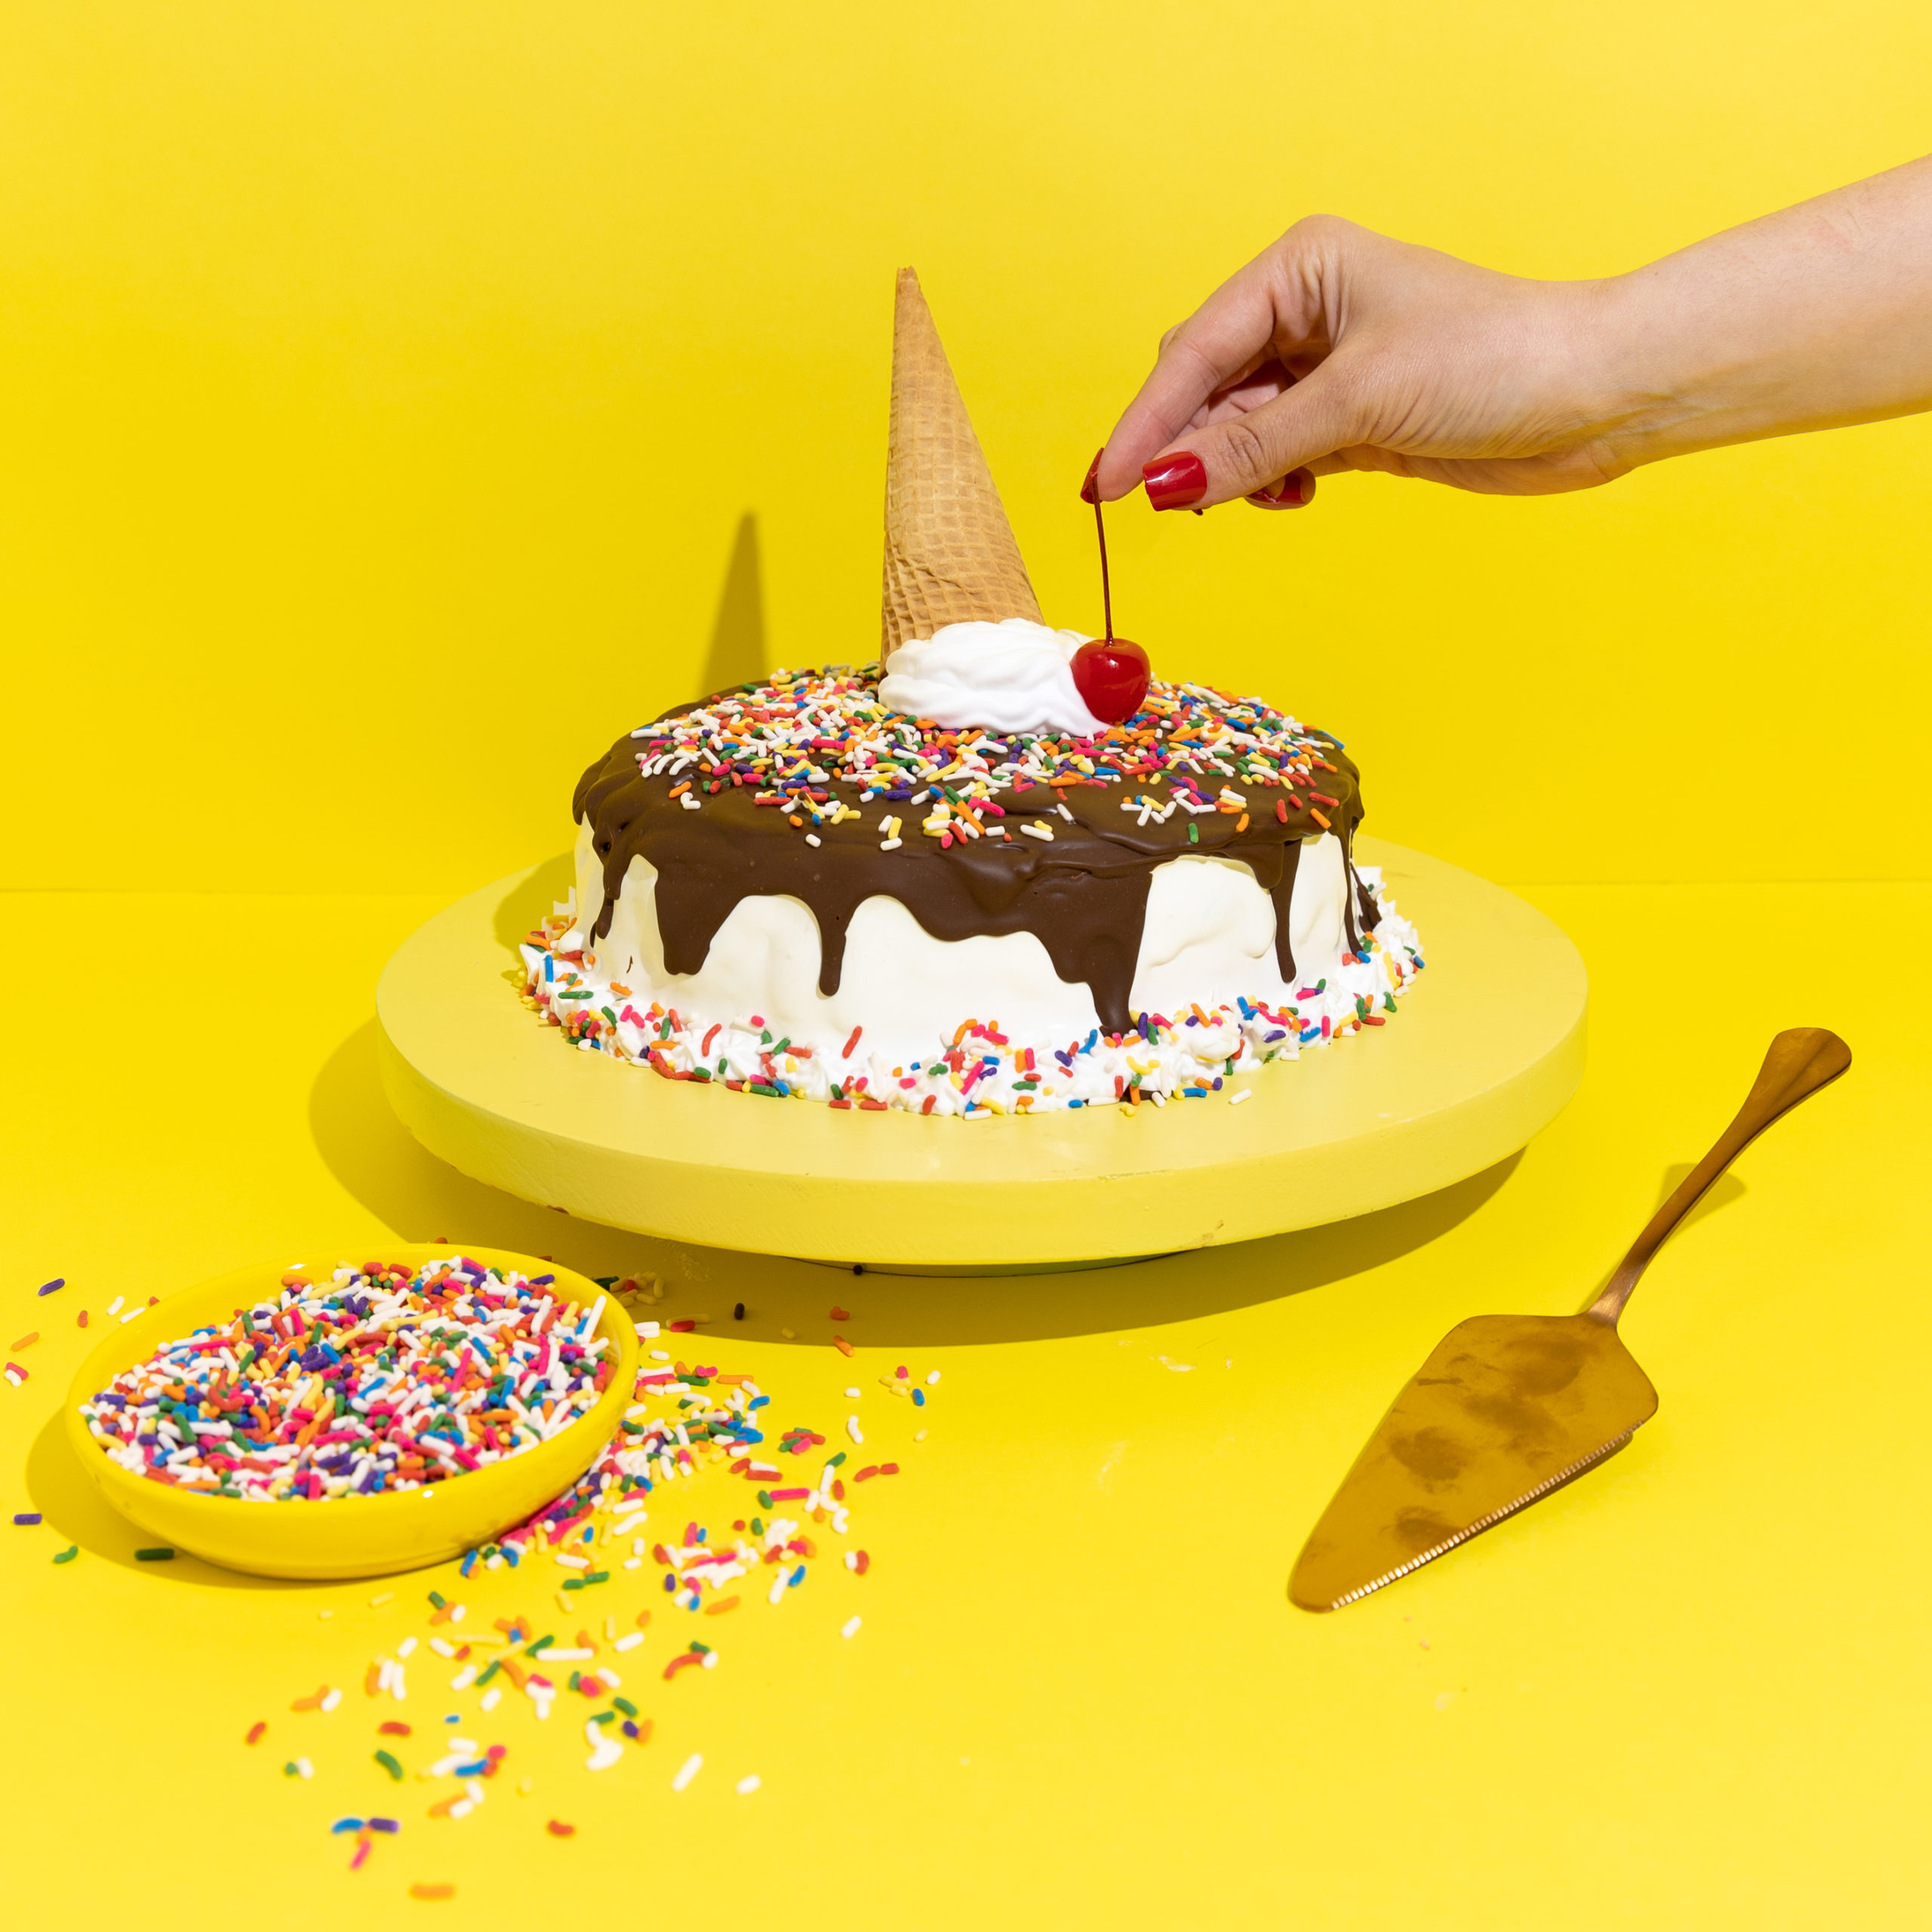 ice cream cake with sprinkles, sugar cone on top, hand placing cherry